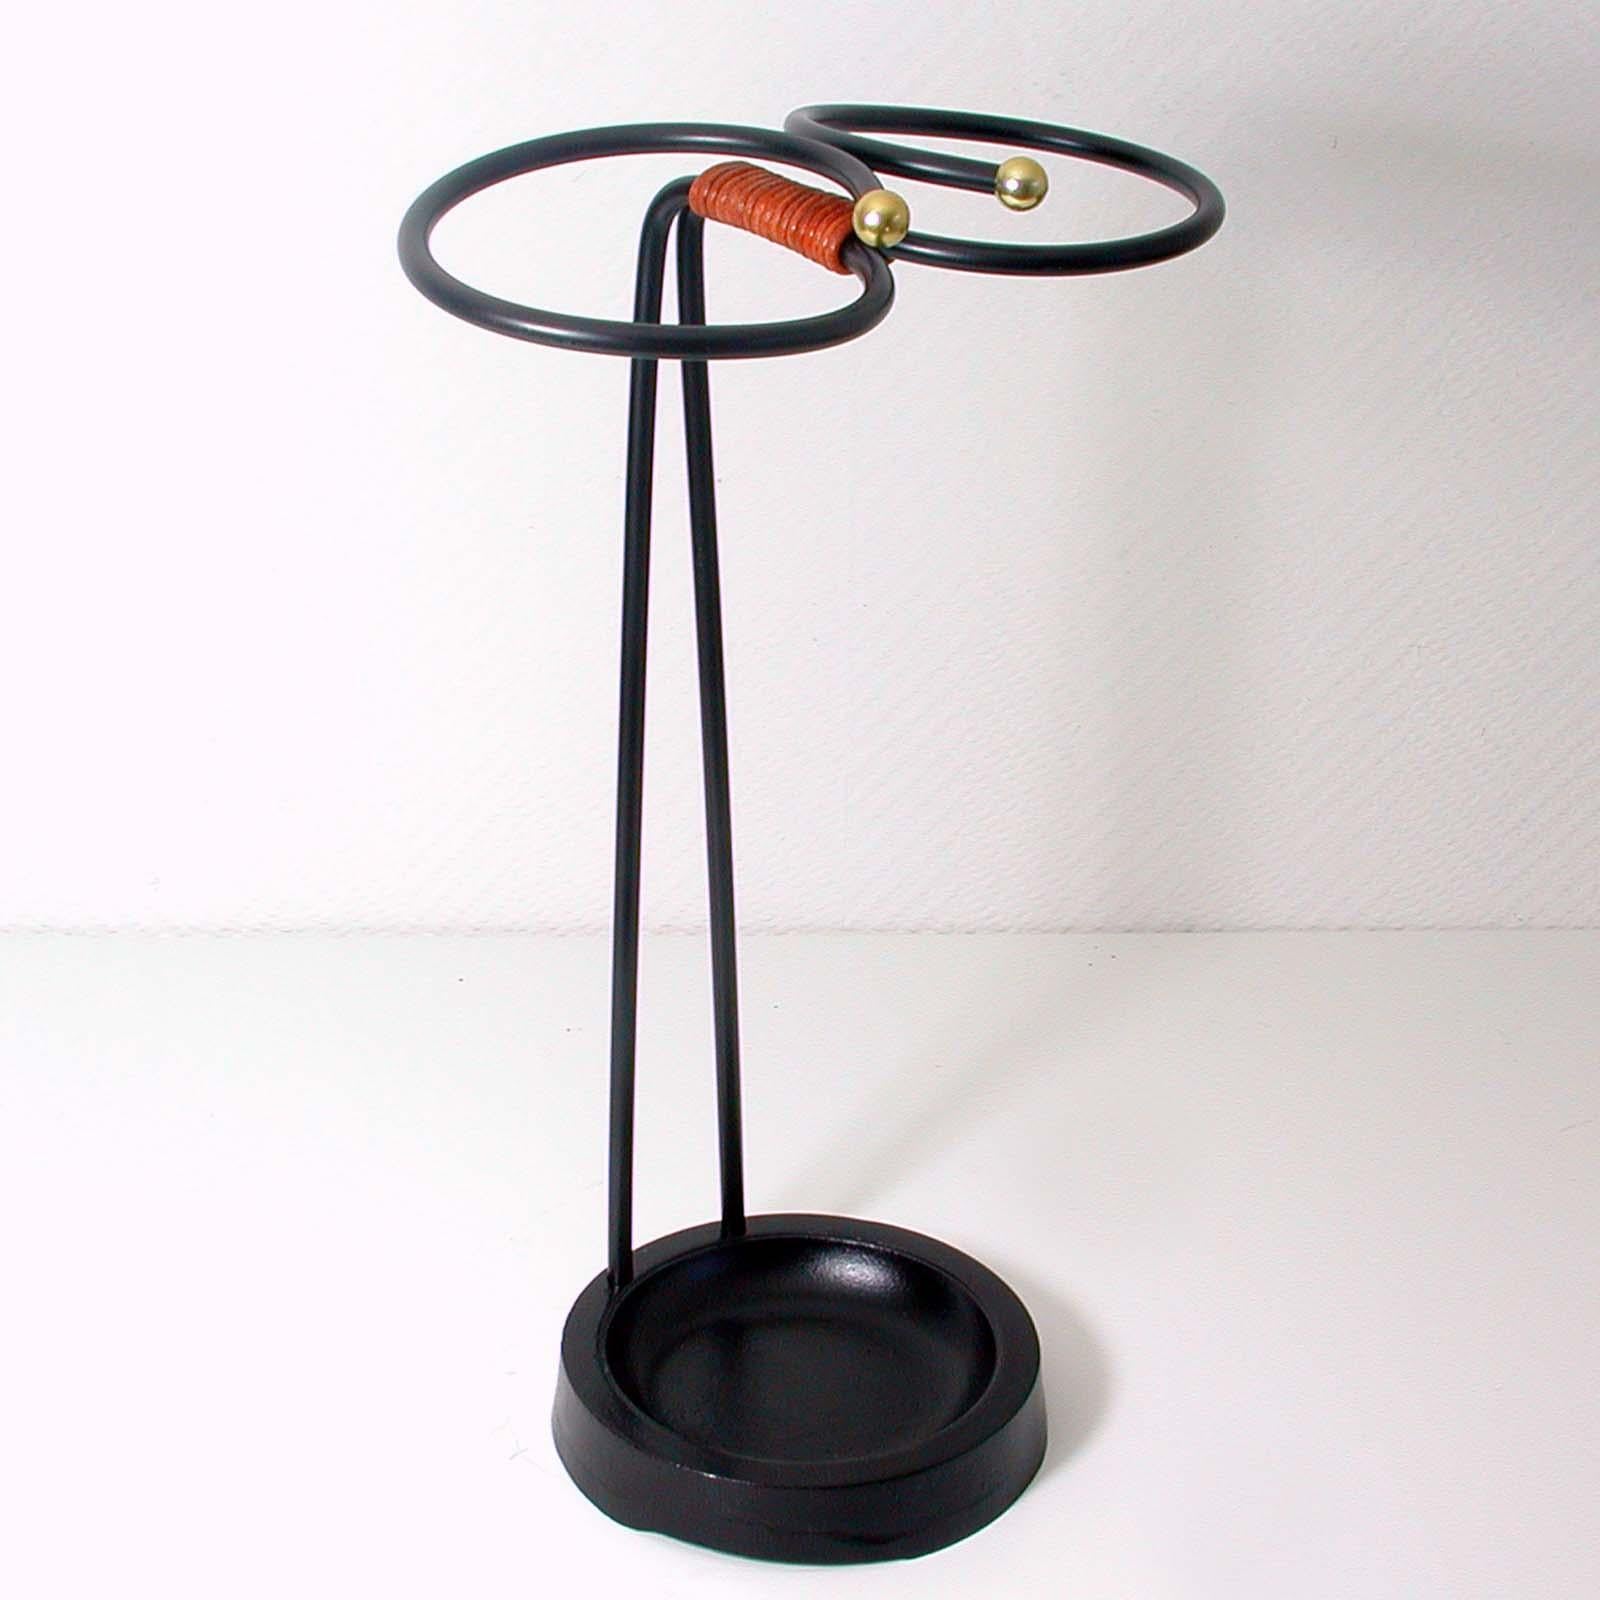 This stylish midcentury vintage umbrella stand was made in Sweden in the 1950s. It is made of black lacquered metal and has got a black lacquered cast iron base. The middle part is made of brown leather.

Condition is very good with minor signs of